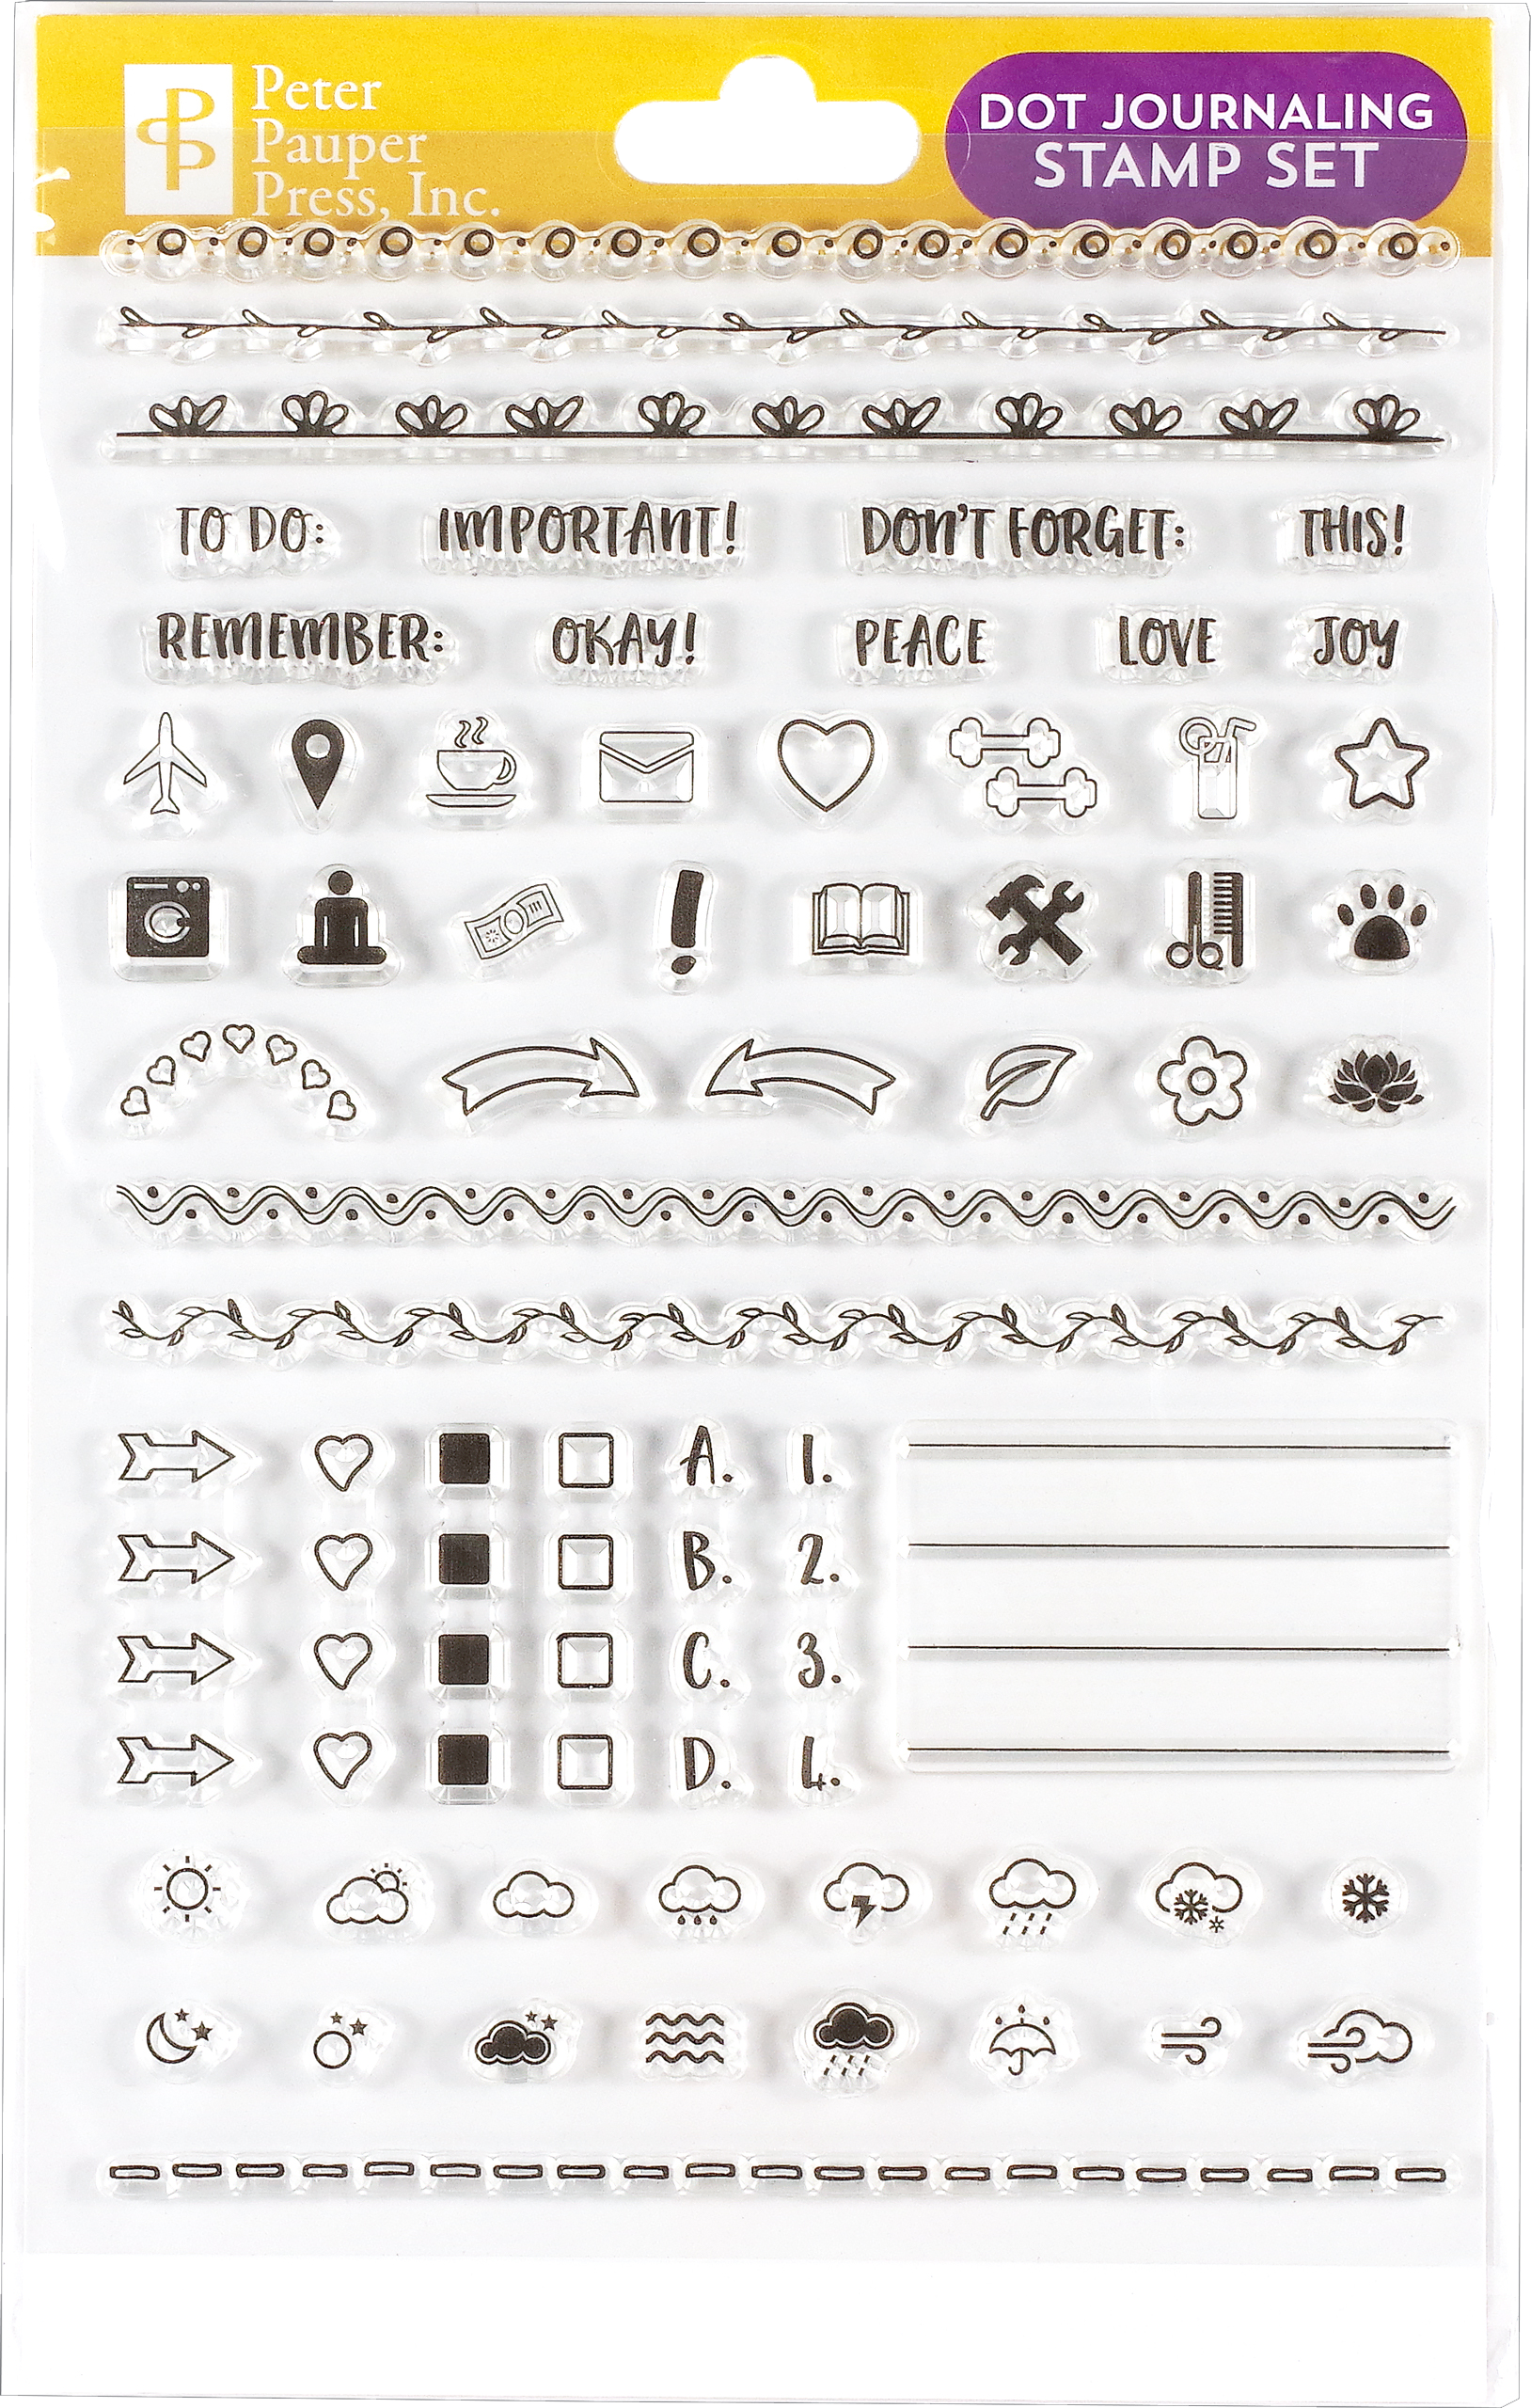  Dot Journaling Clear Stamp Set (60 Individual Stamps):  9781441335227: Peter Pauper Press: Arts, Crafts & Sewing